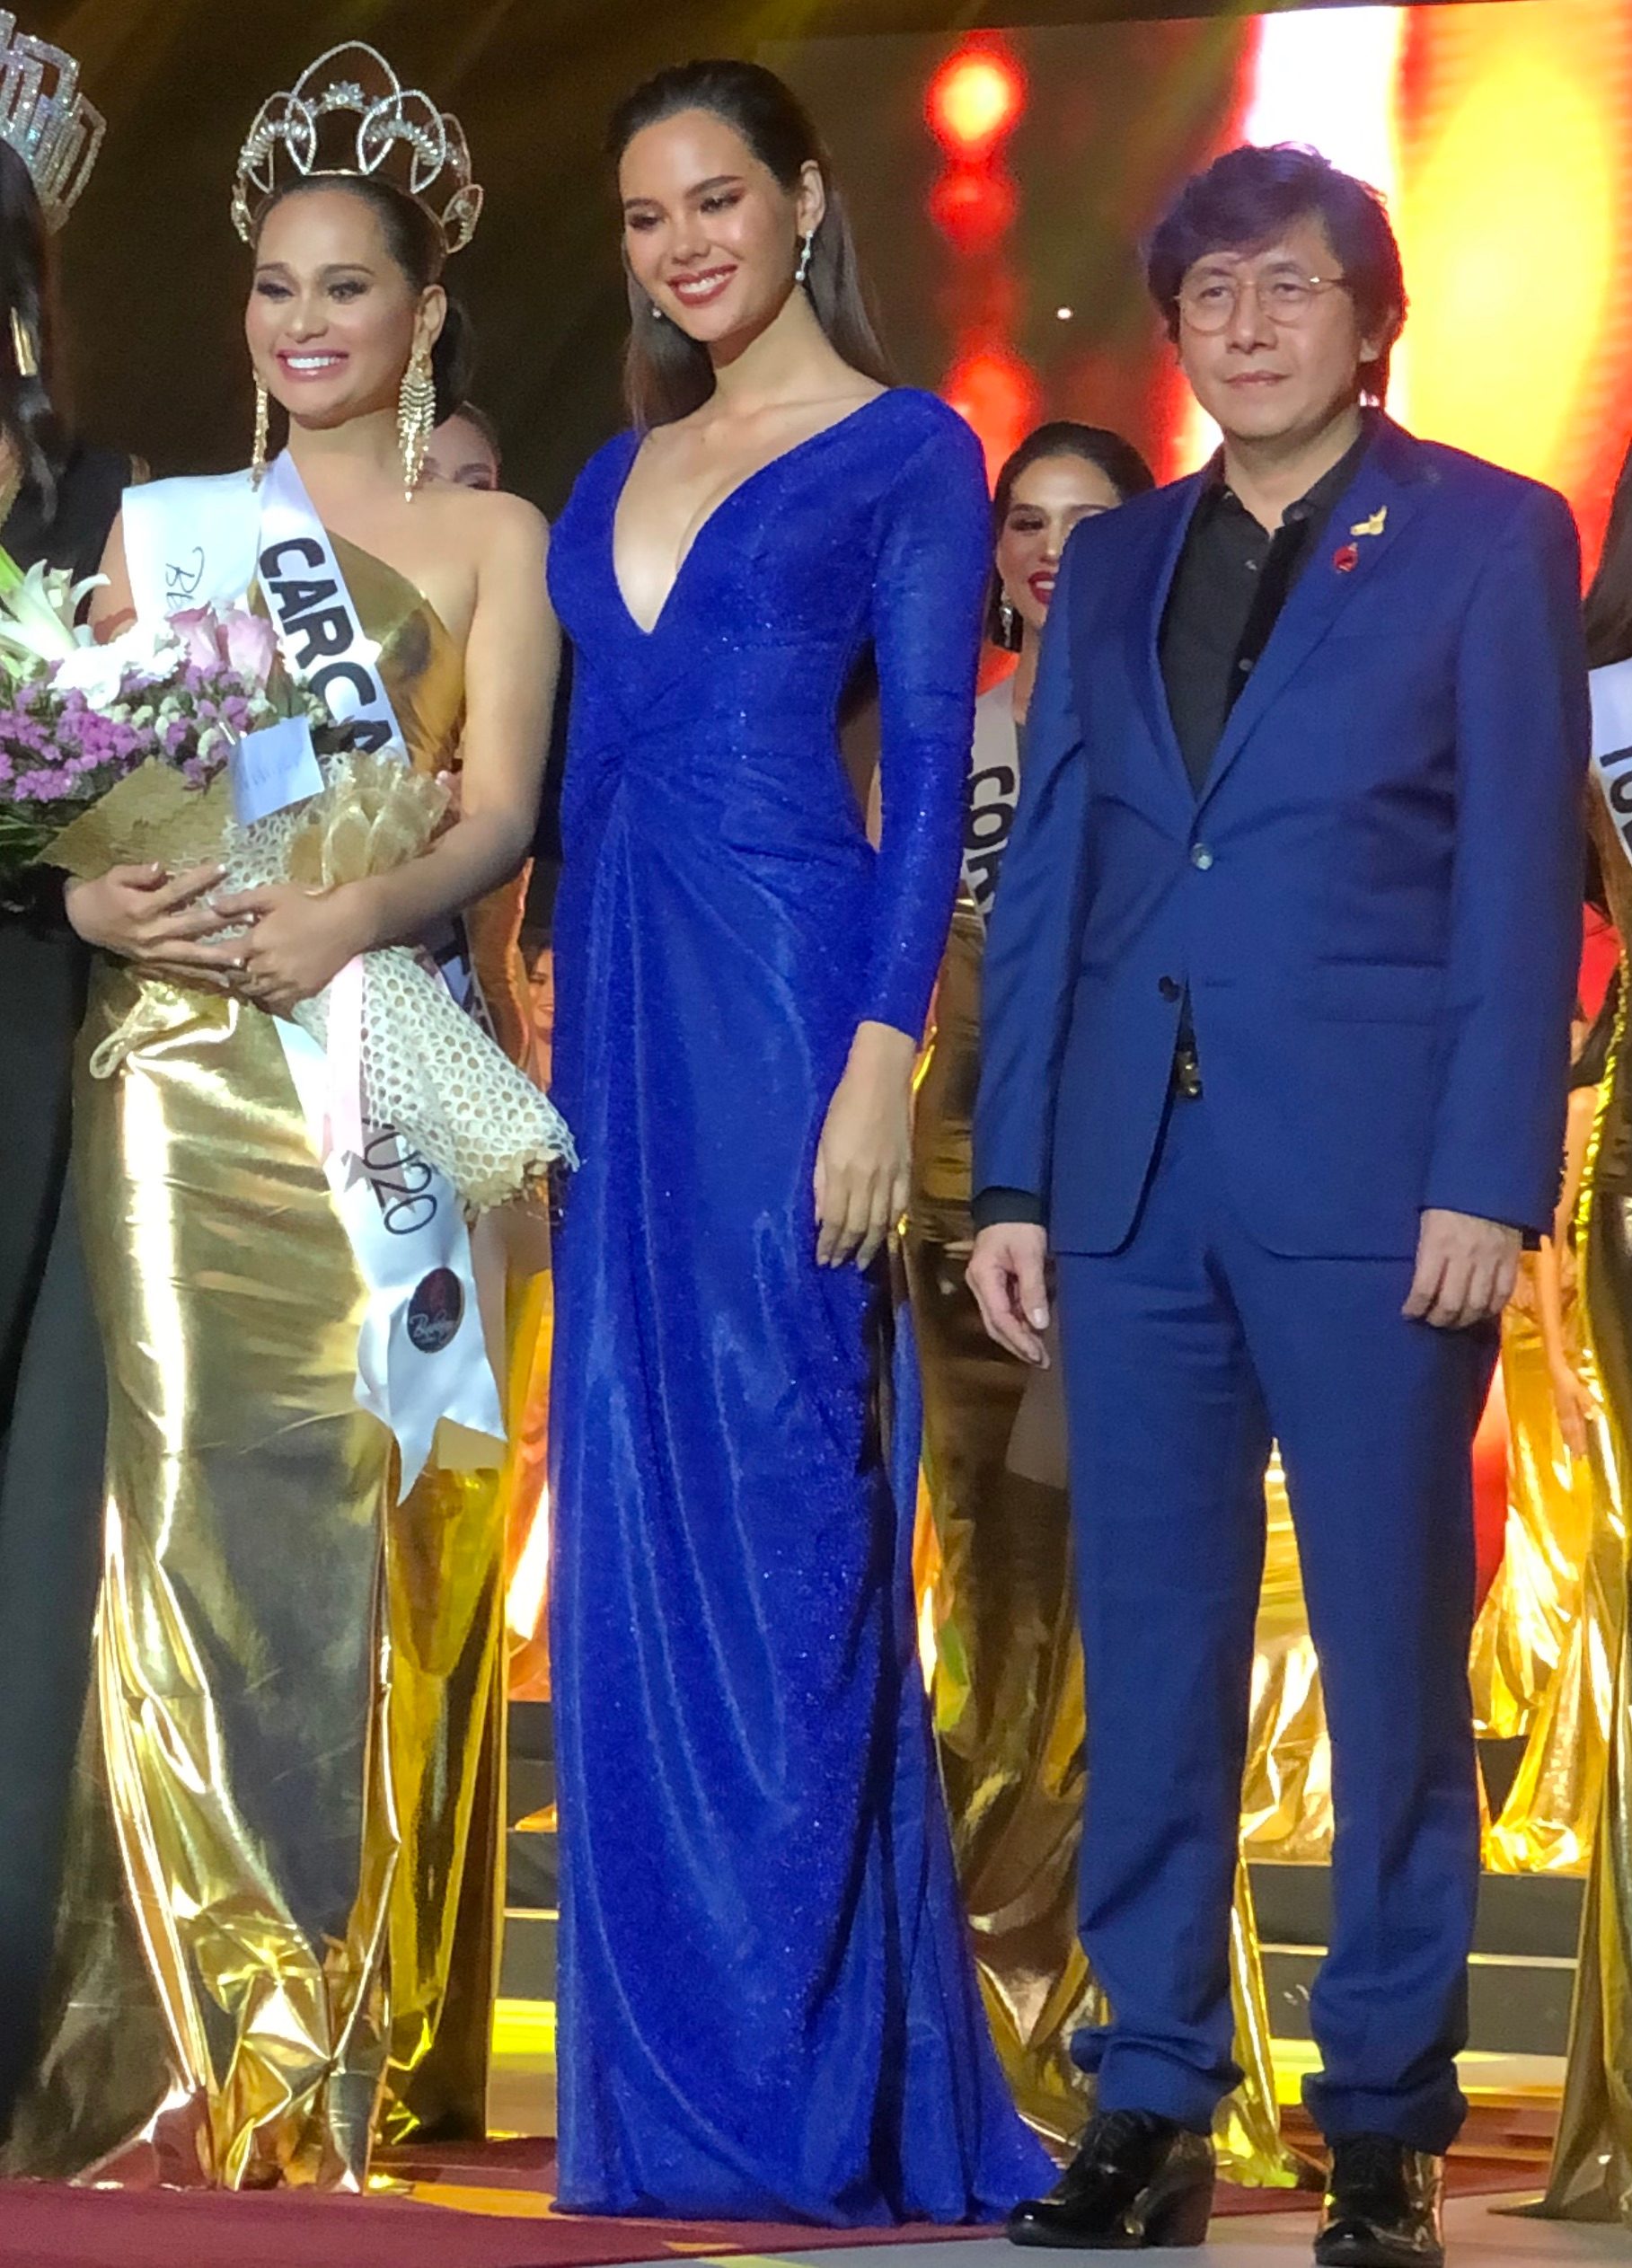 HERITAGE QUEEN. Binibining Cebu Heritage 2020 Marla Alforque (Carcar) along with Miss Universe 2018 and singer, Catriona Gray and Anthony TIng, SHSB Batch1985 Foundation, Inc. President. Photo by Voltaire Tayag/Rappler
 